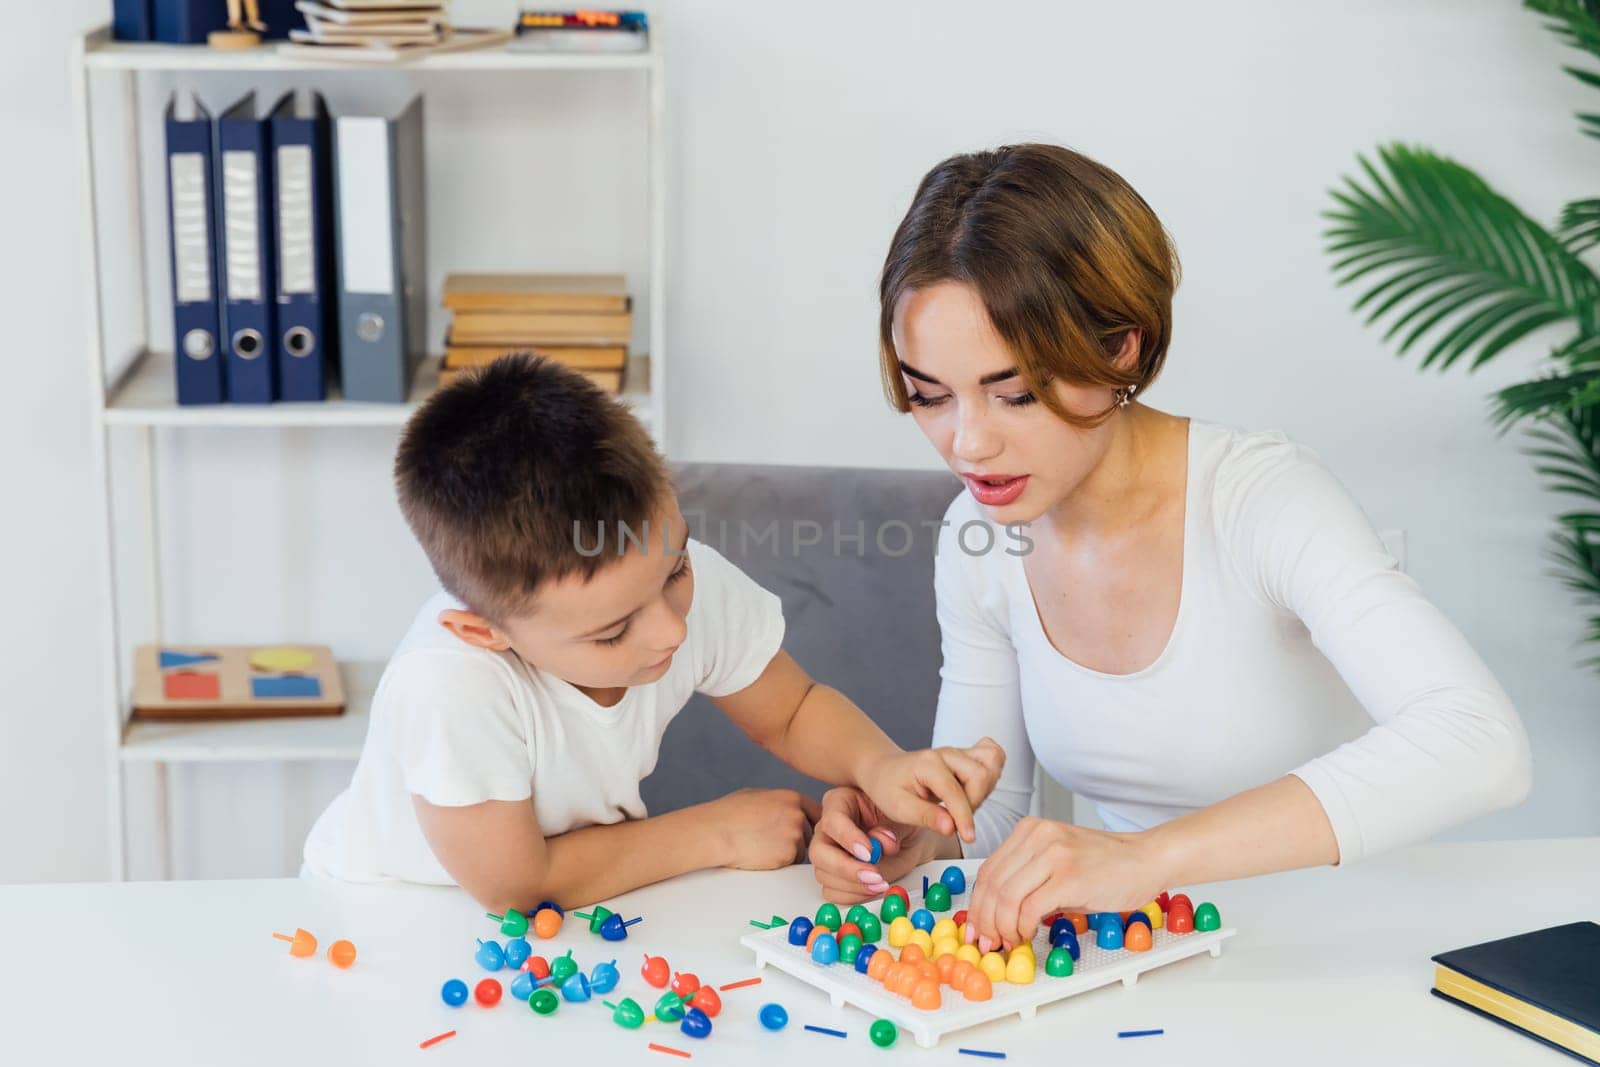 Teacher playing educational games with boy at school by Simakov